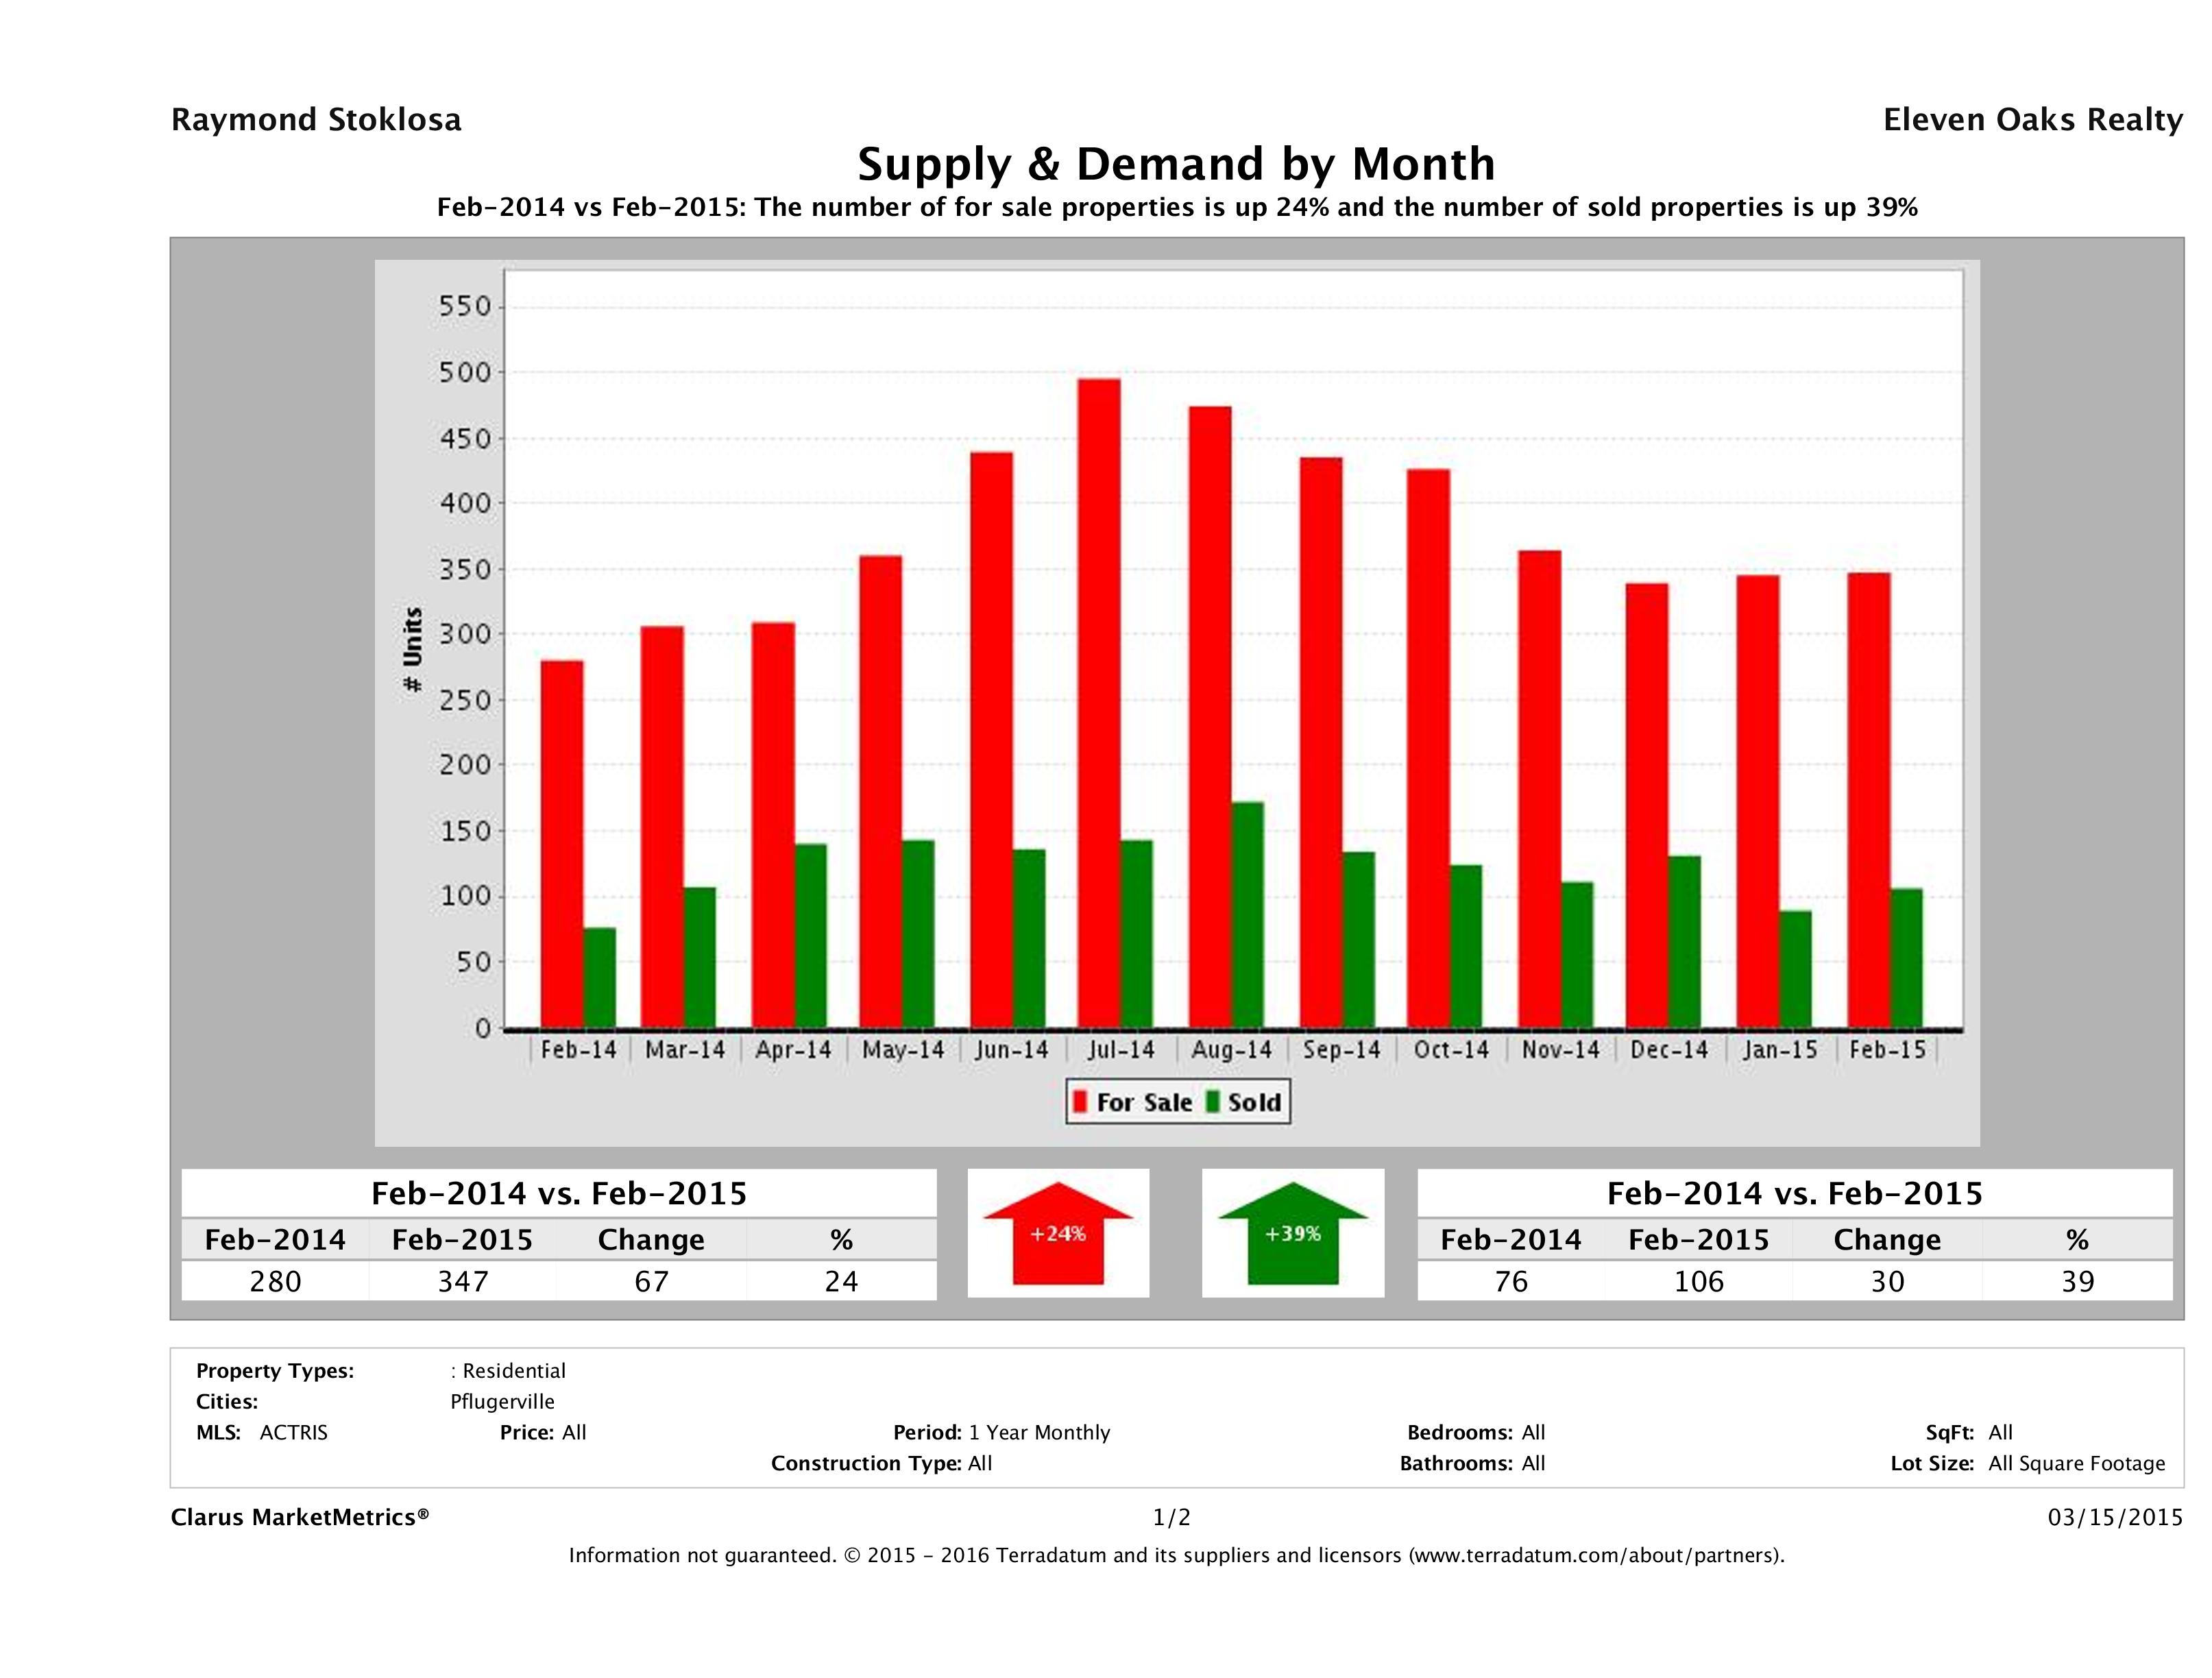 Pflugerville real estate market supply and demand February 2015